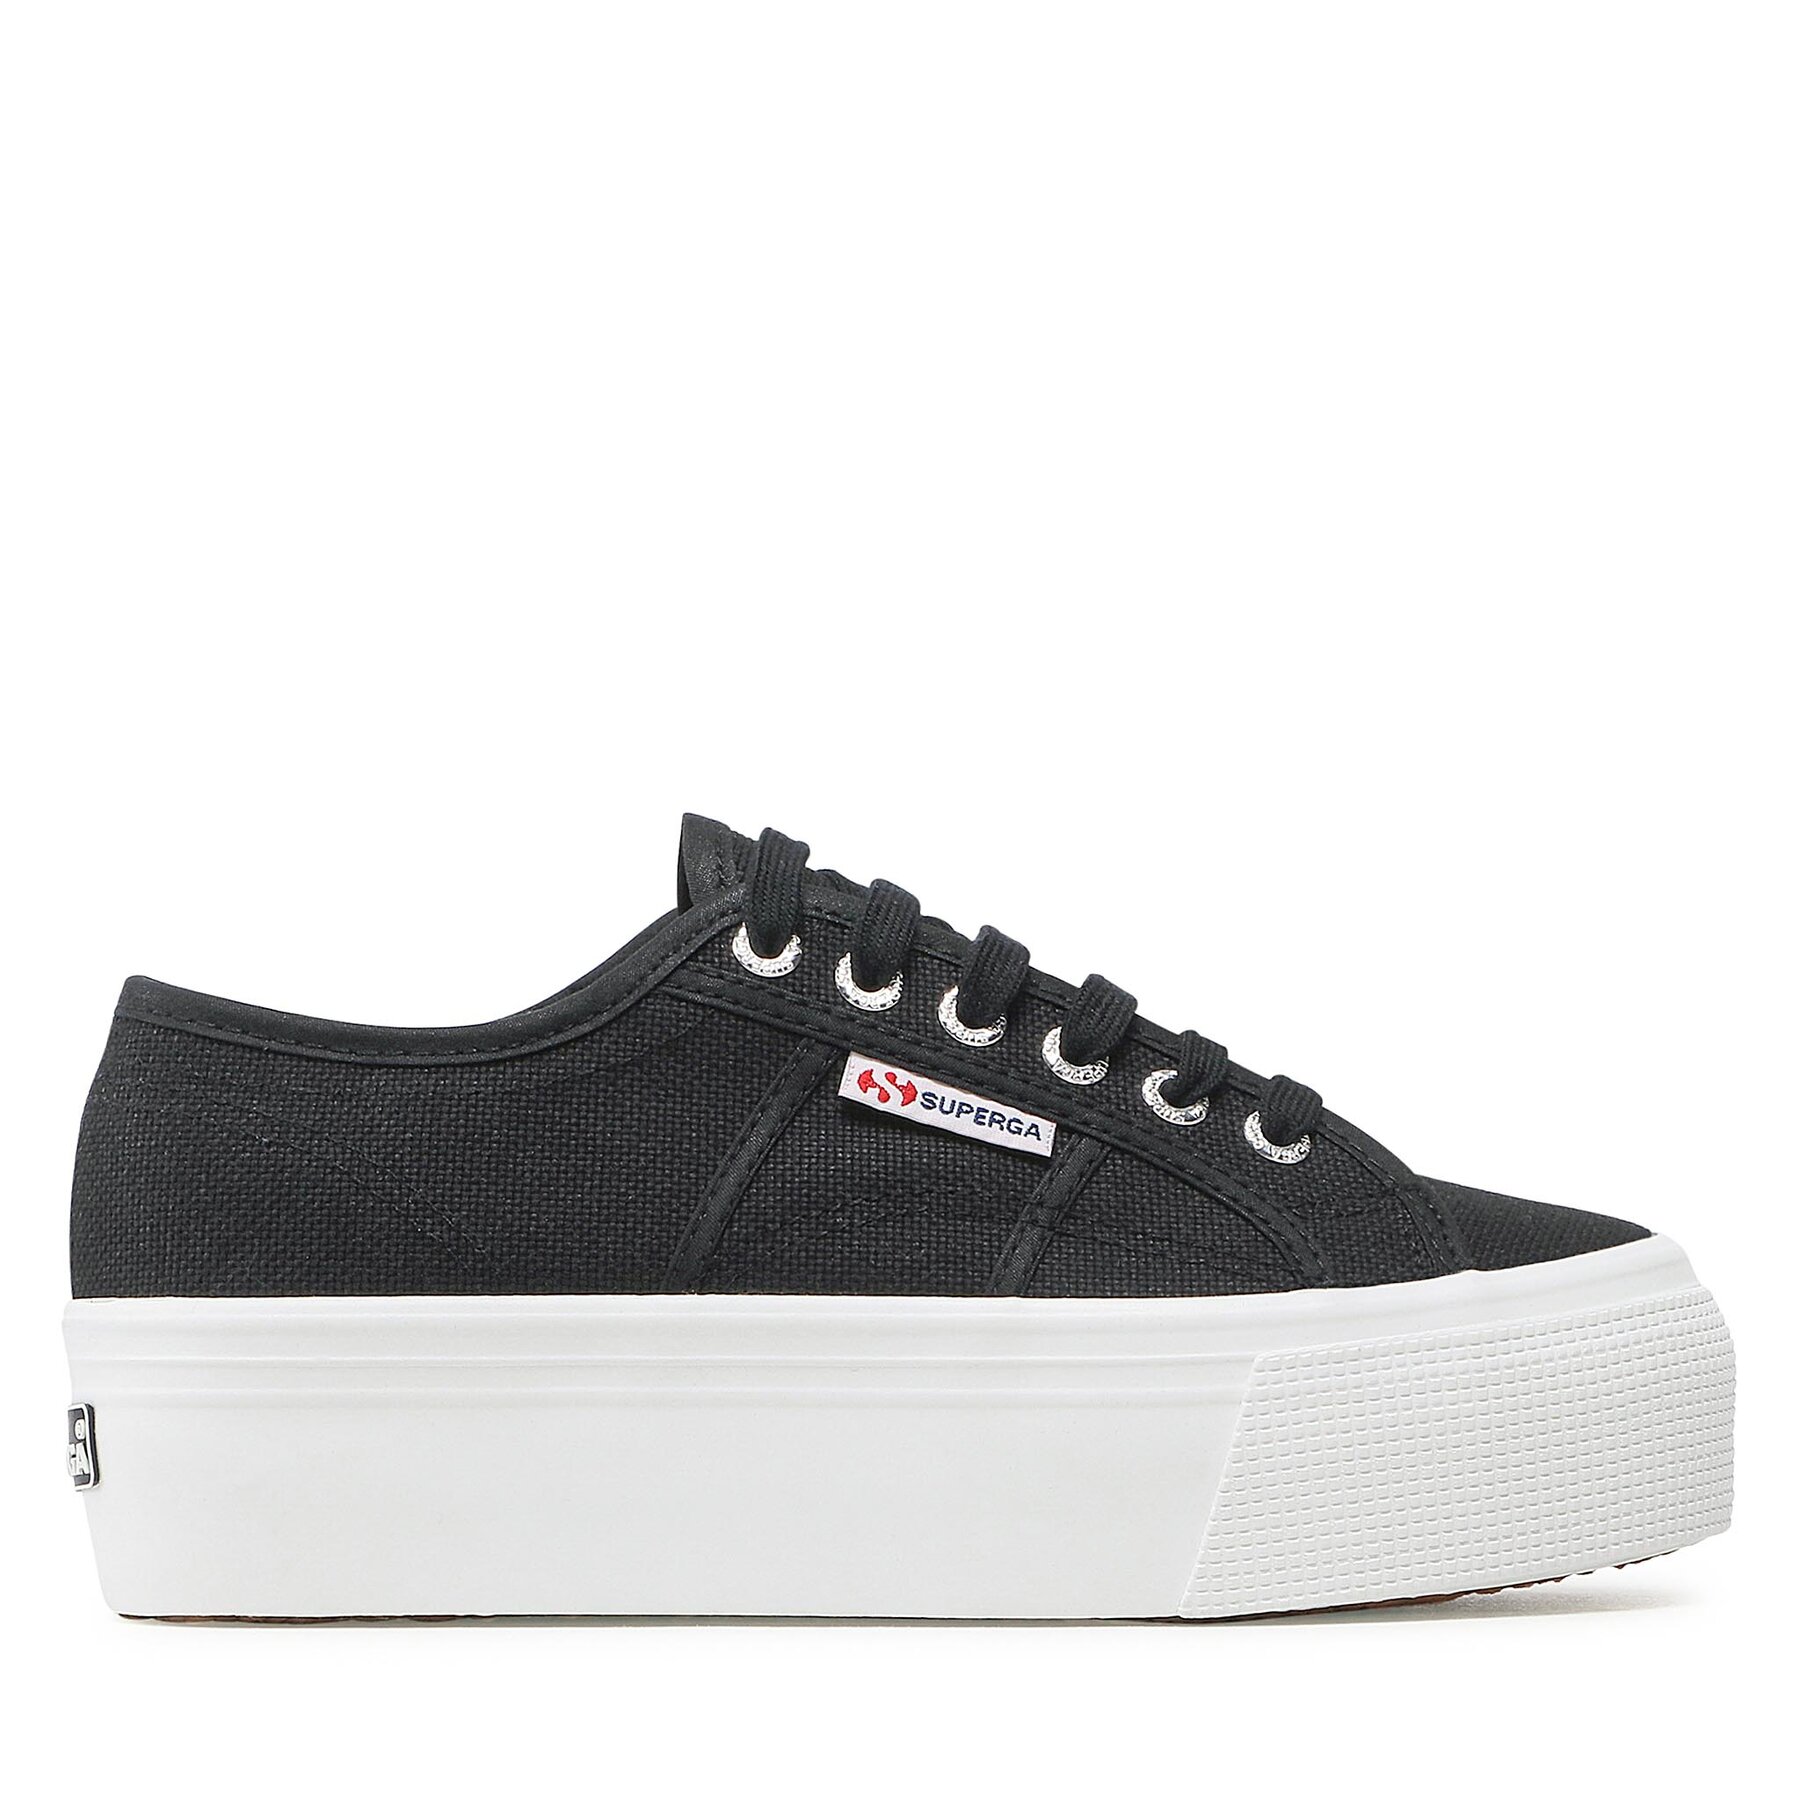 Superga 2790 COTW Linea Up and Down white/black - Sneakers